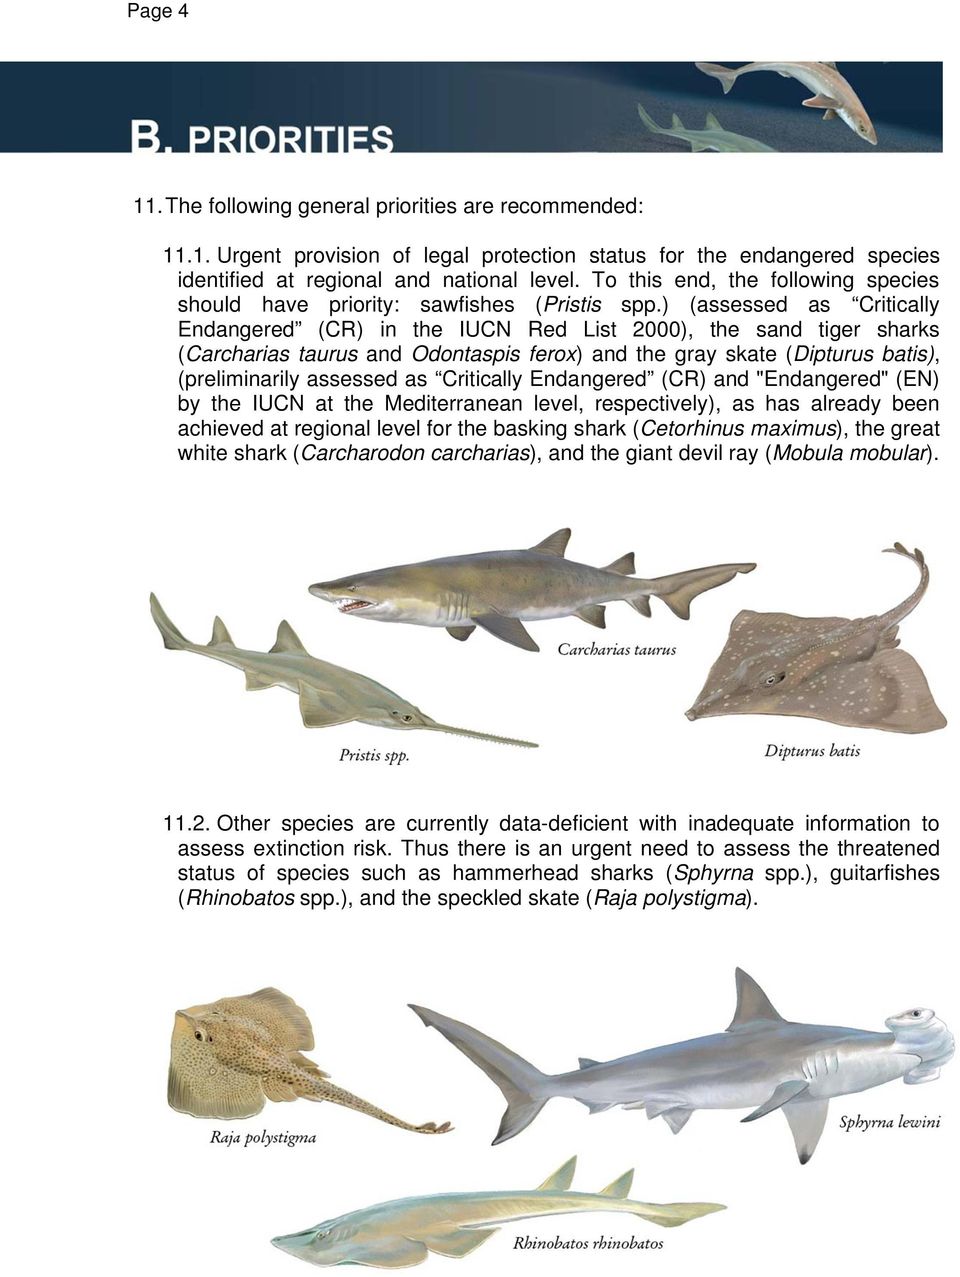 ) (assessed as Critically Endangered (CR) in the IUCN Red List 2000), the sand tiger sharks (Carcharias taurus and Odontaspis ferox) and the gray skate (Dipturus batis), (preliminarily assessed as